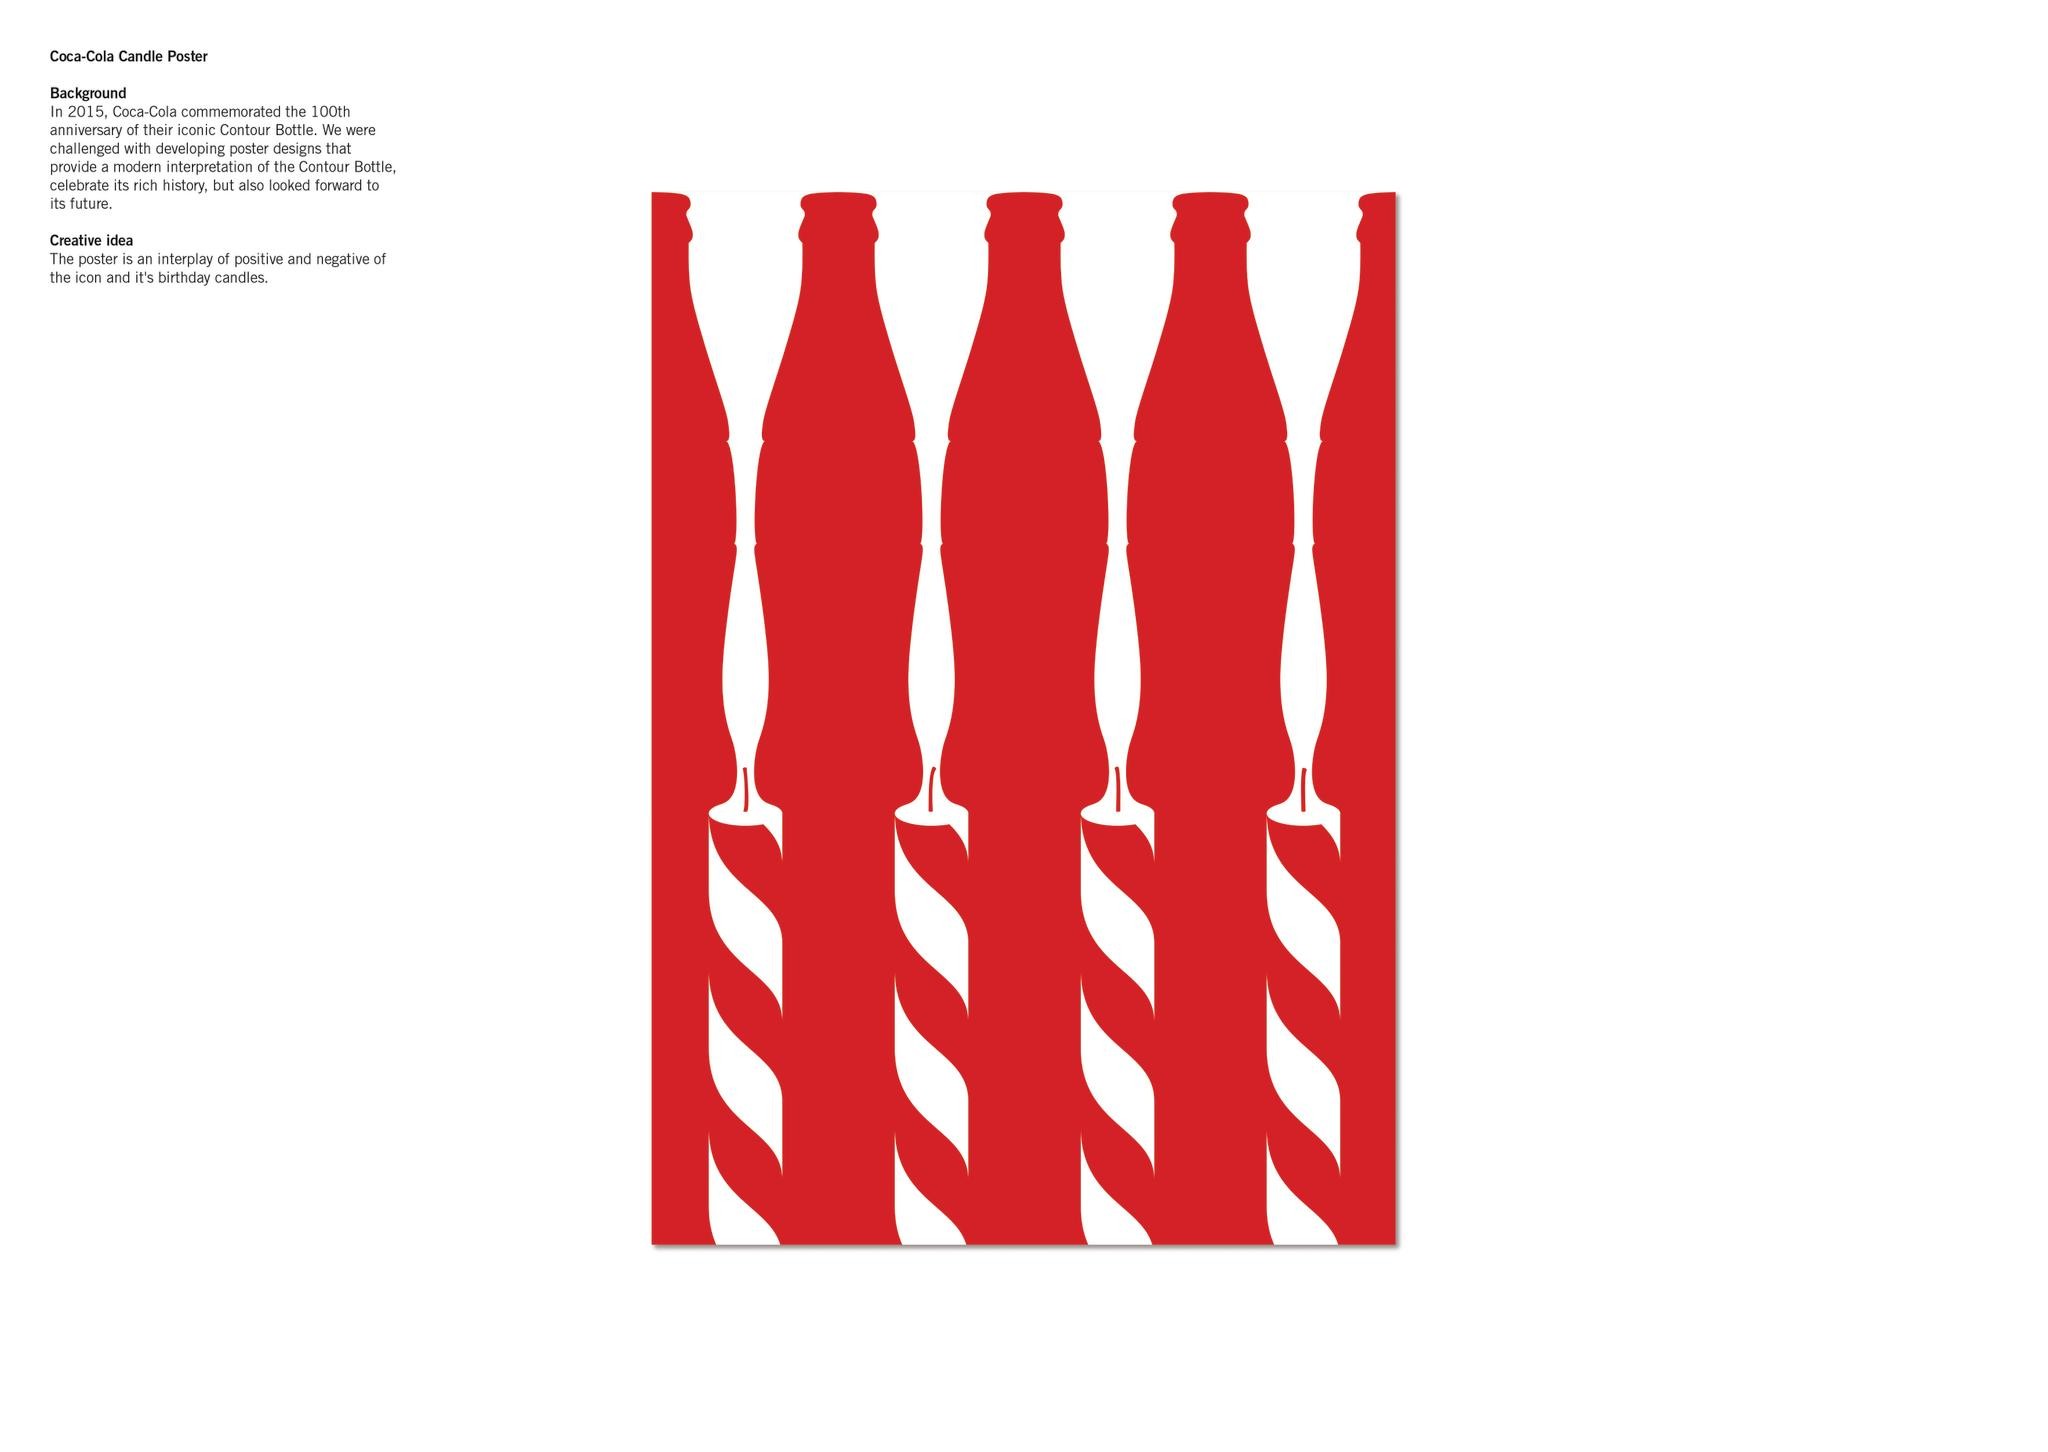 Coca-Cola Candle Poster